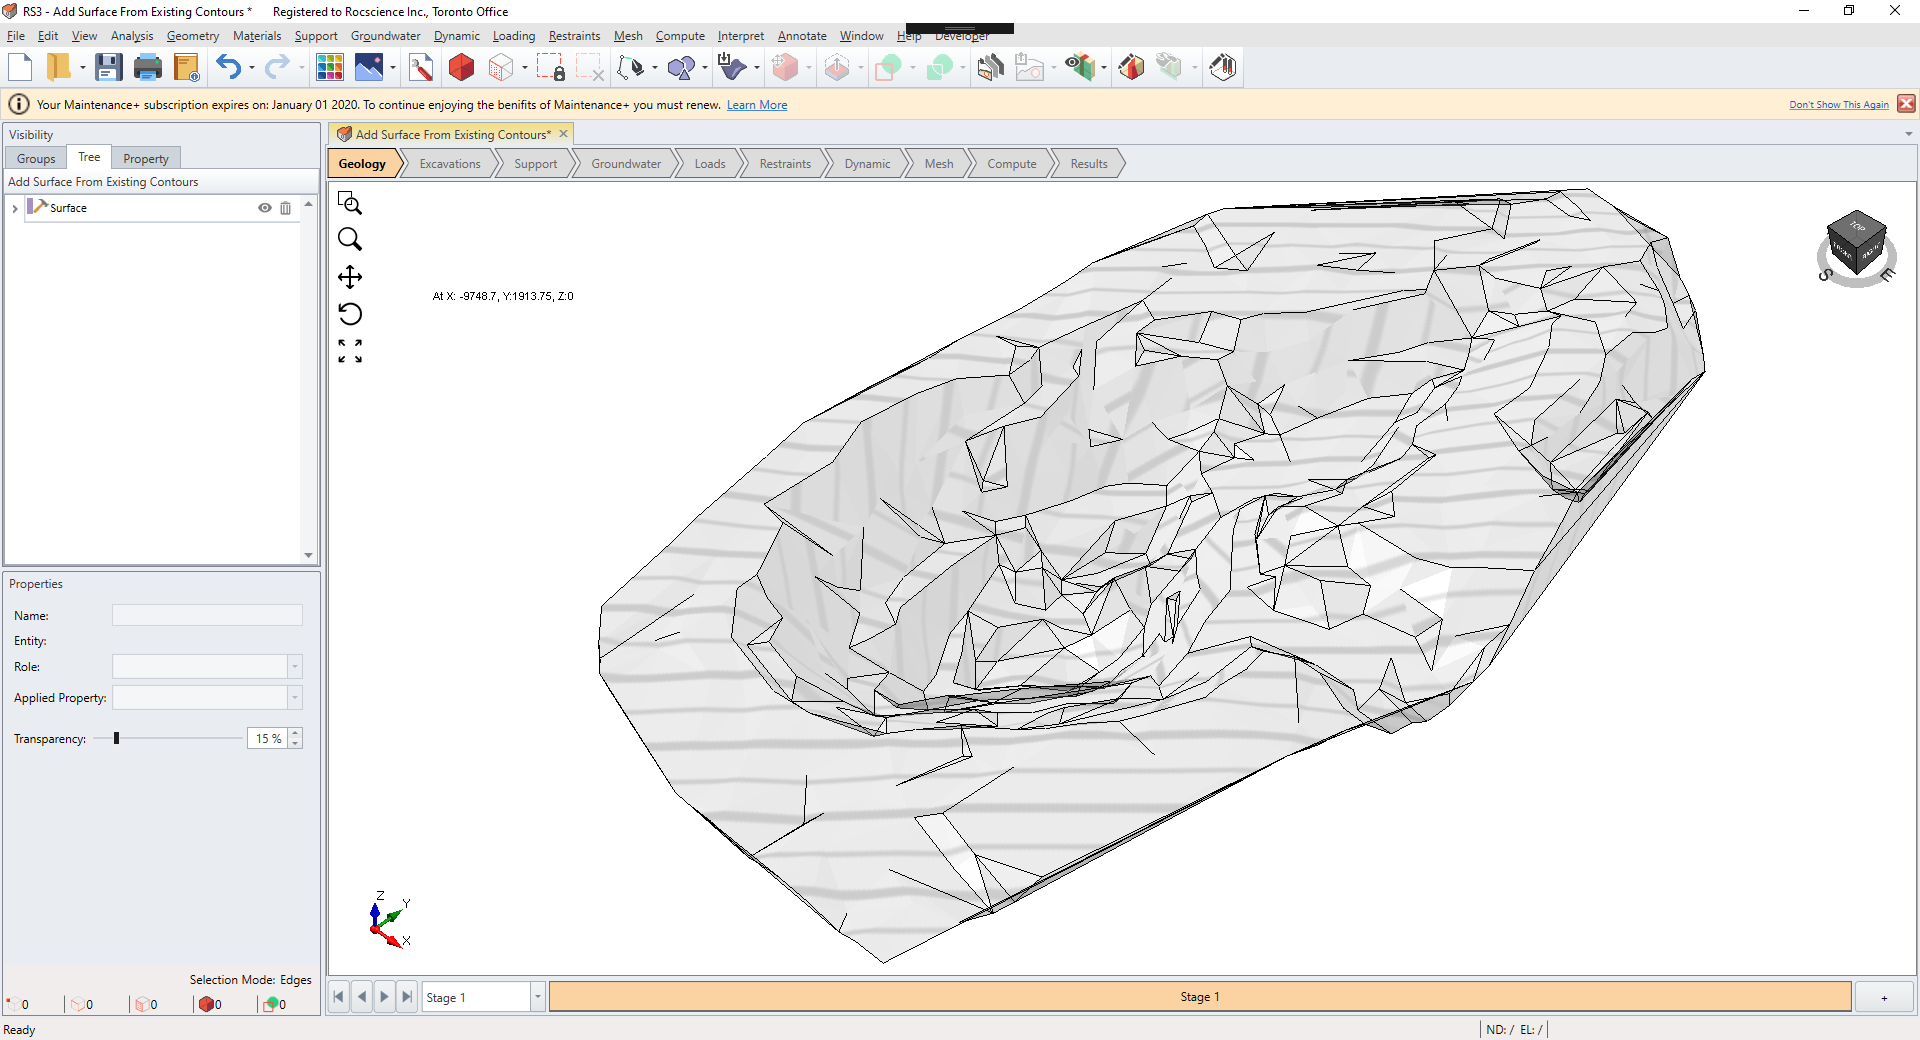 Add Surface From Existing Contours Geometry Model View